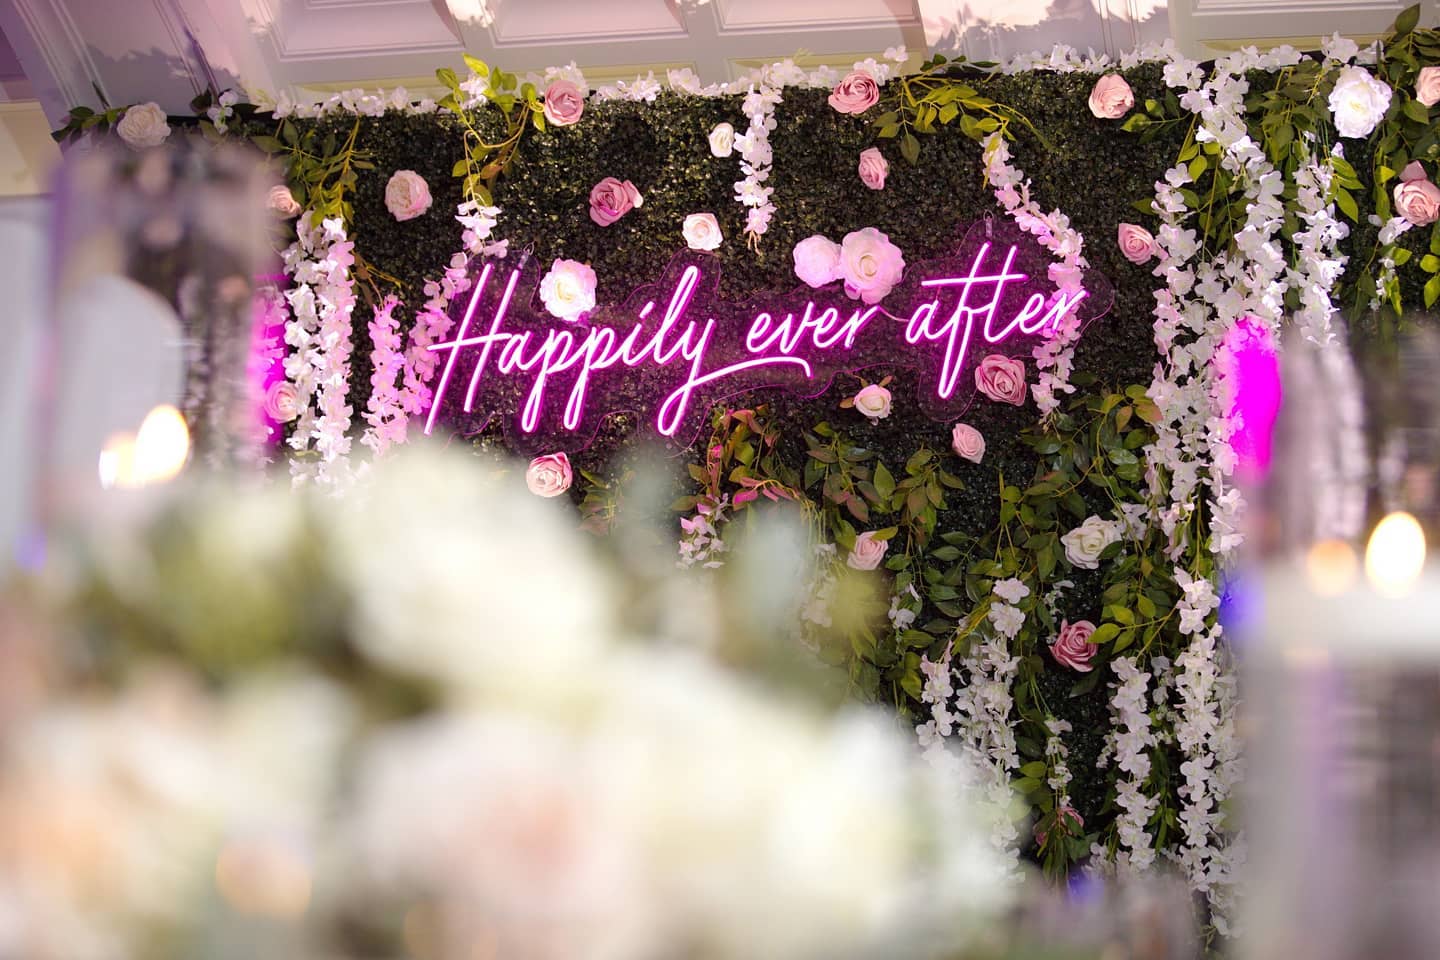 neon sign and photo backdrop at wedding